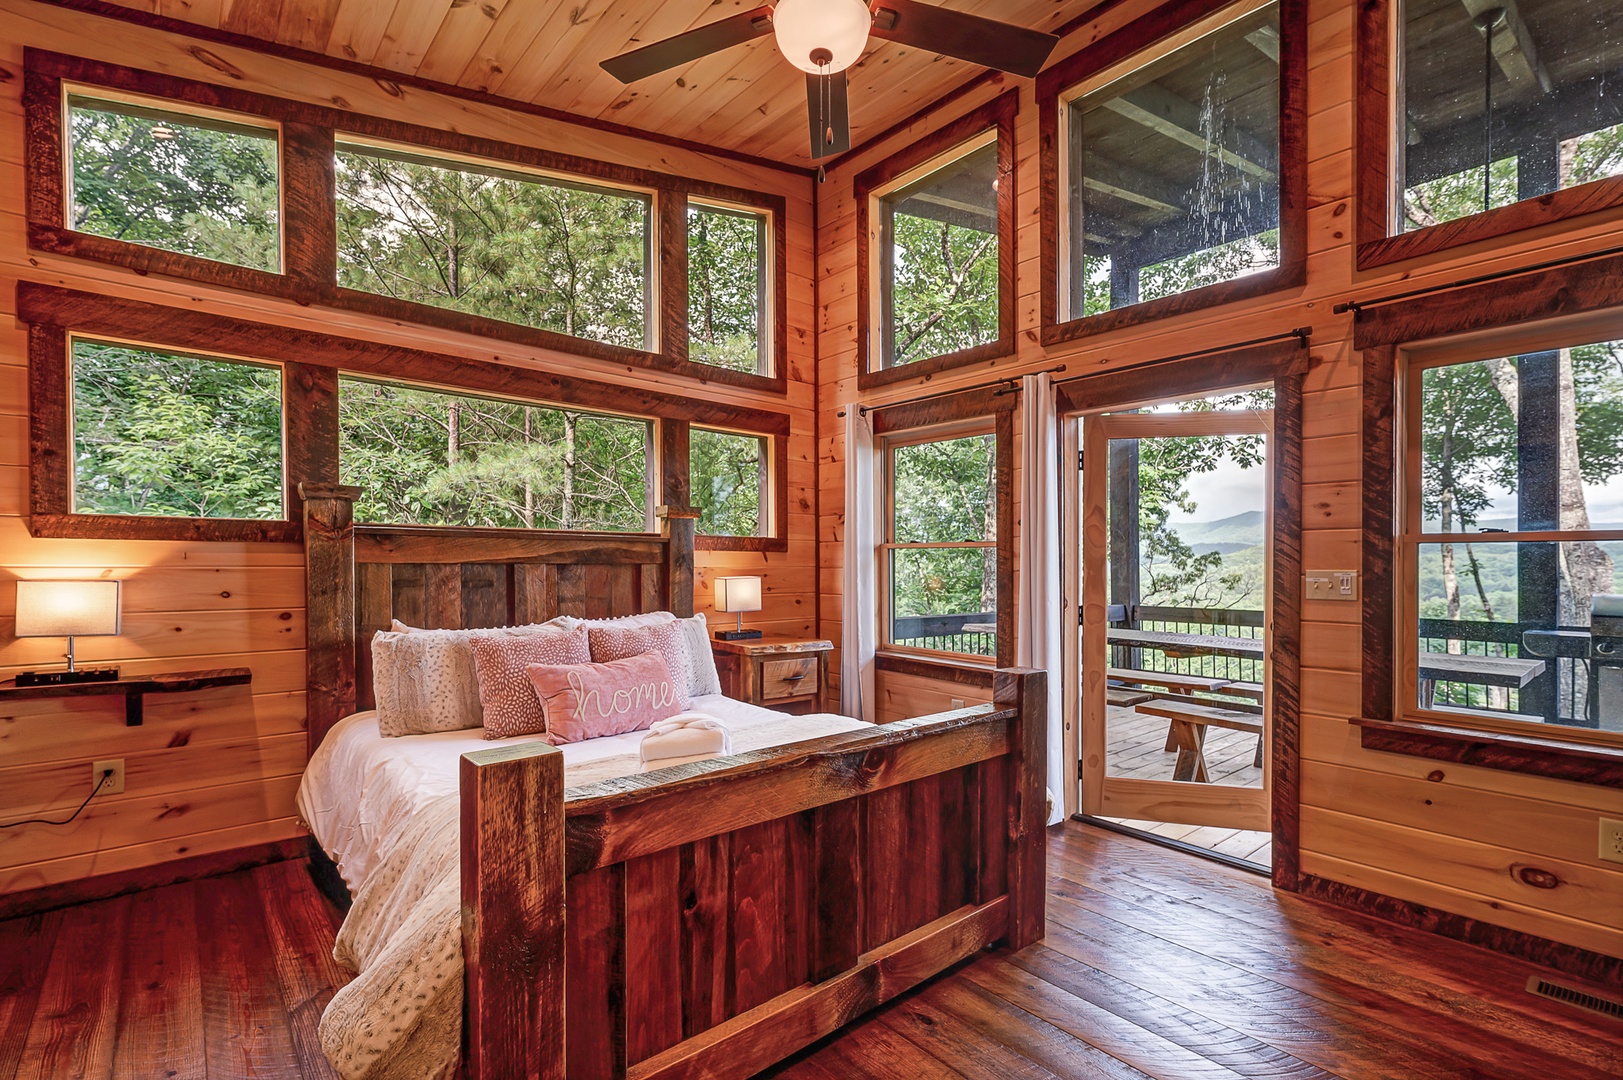 Feather & Fawn Lodge- Entry level guest bedroom with deck access